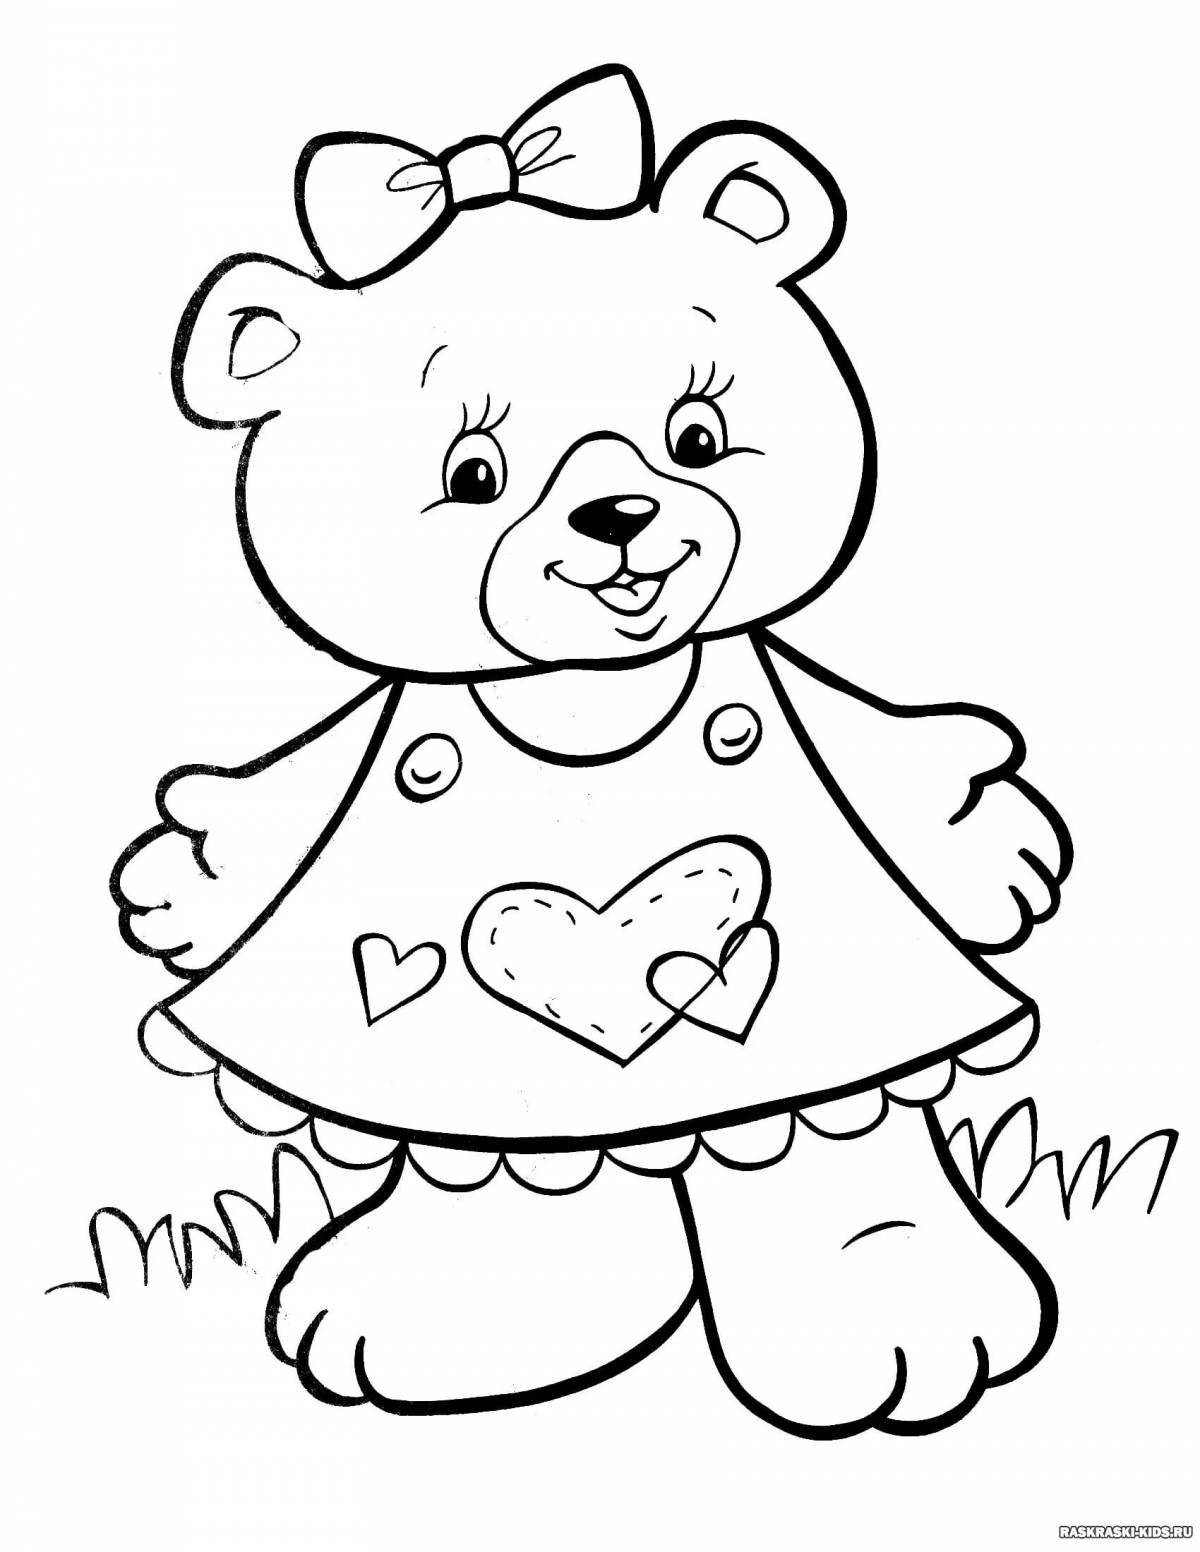 Fancy coloring page 4 for girls